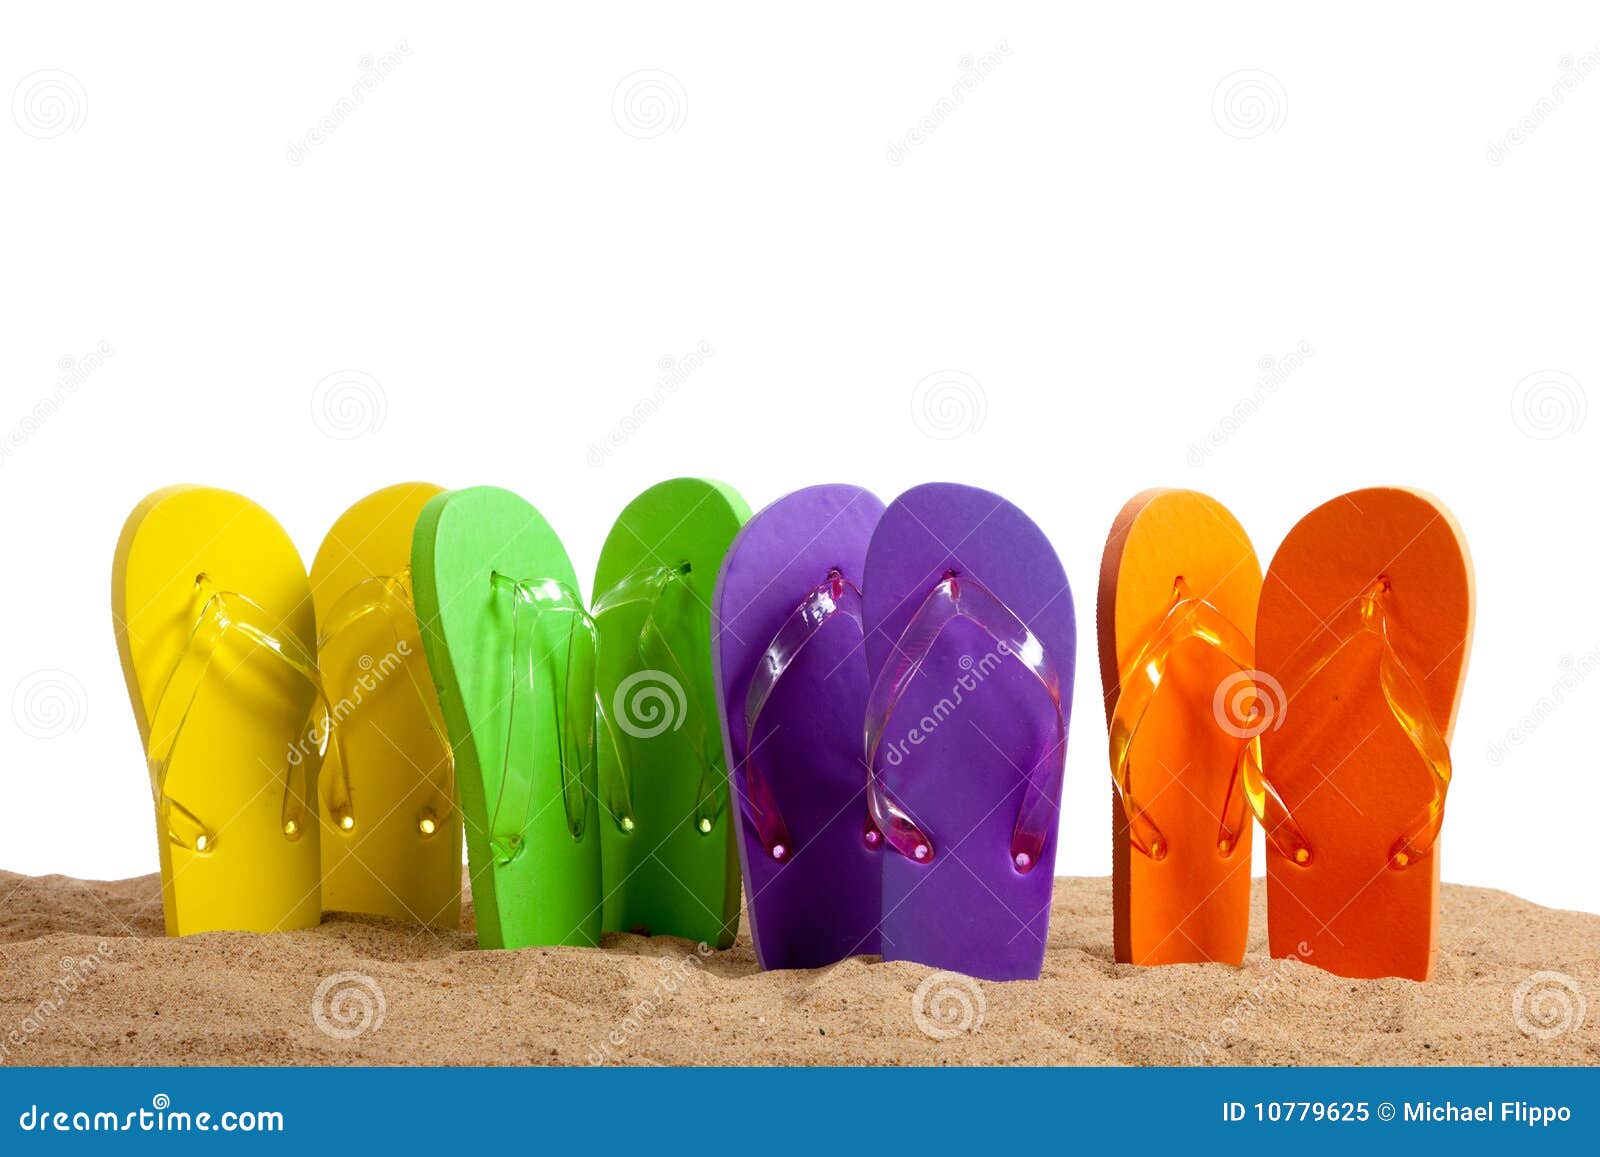 Colorful Flip-Flop Sandles on a Sandy Beach Stock Image - Image of ...